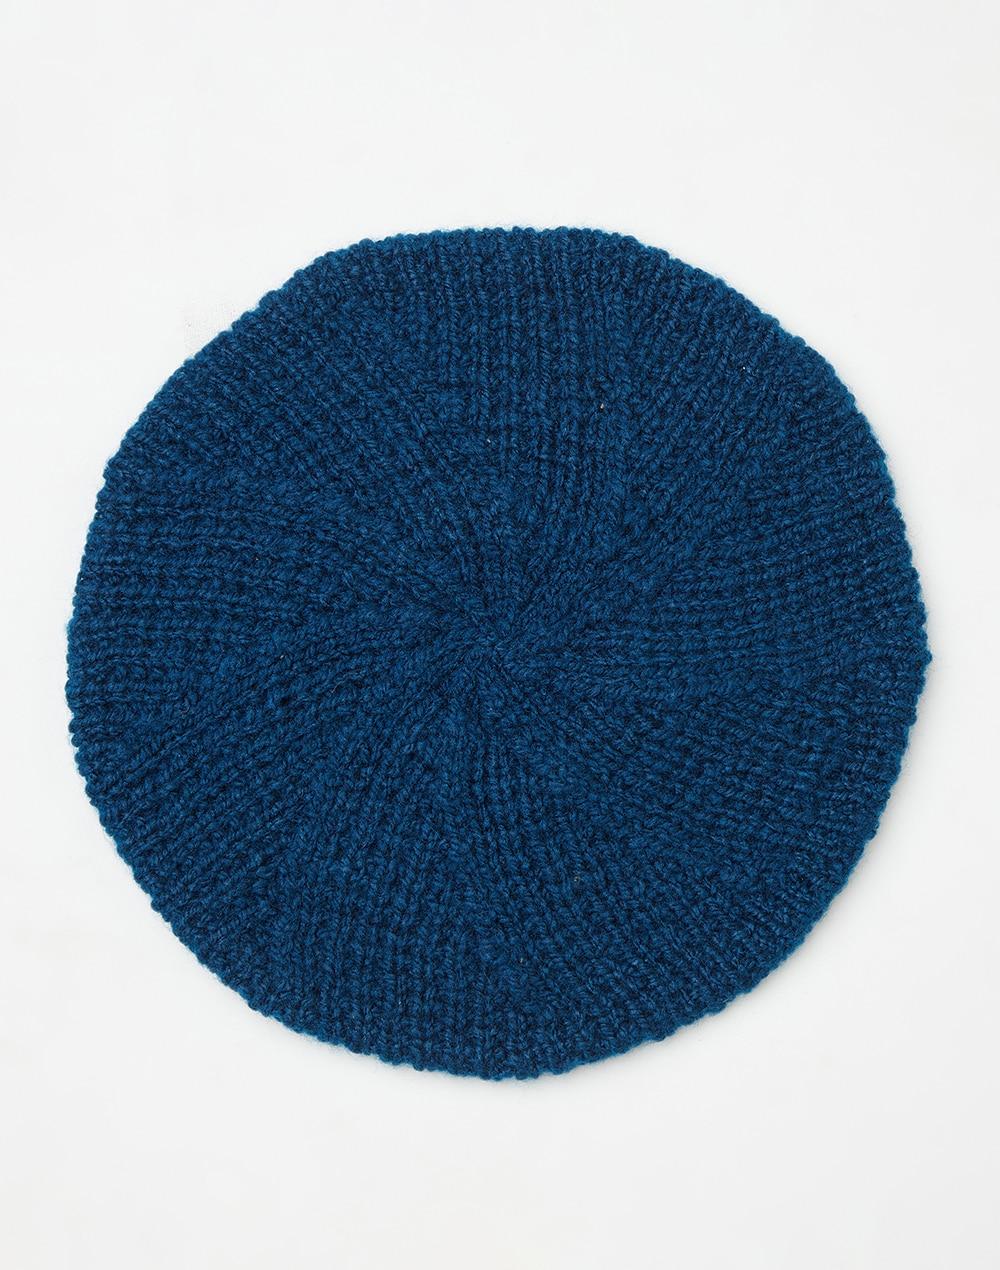 acrylic knitted cap